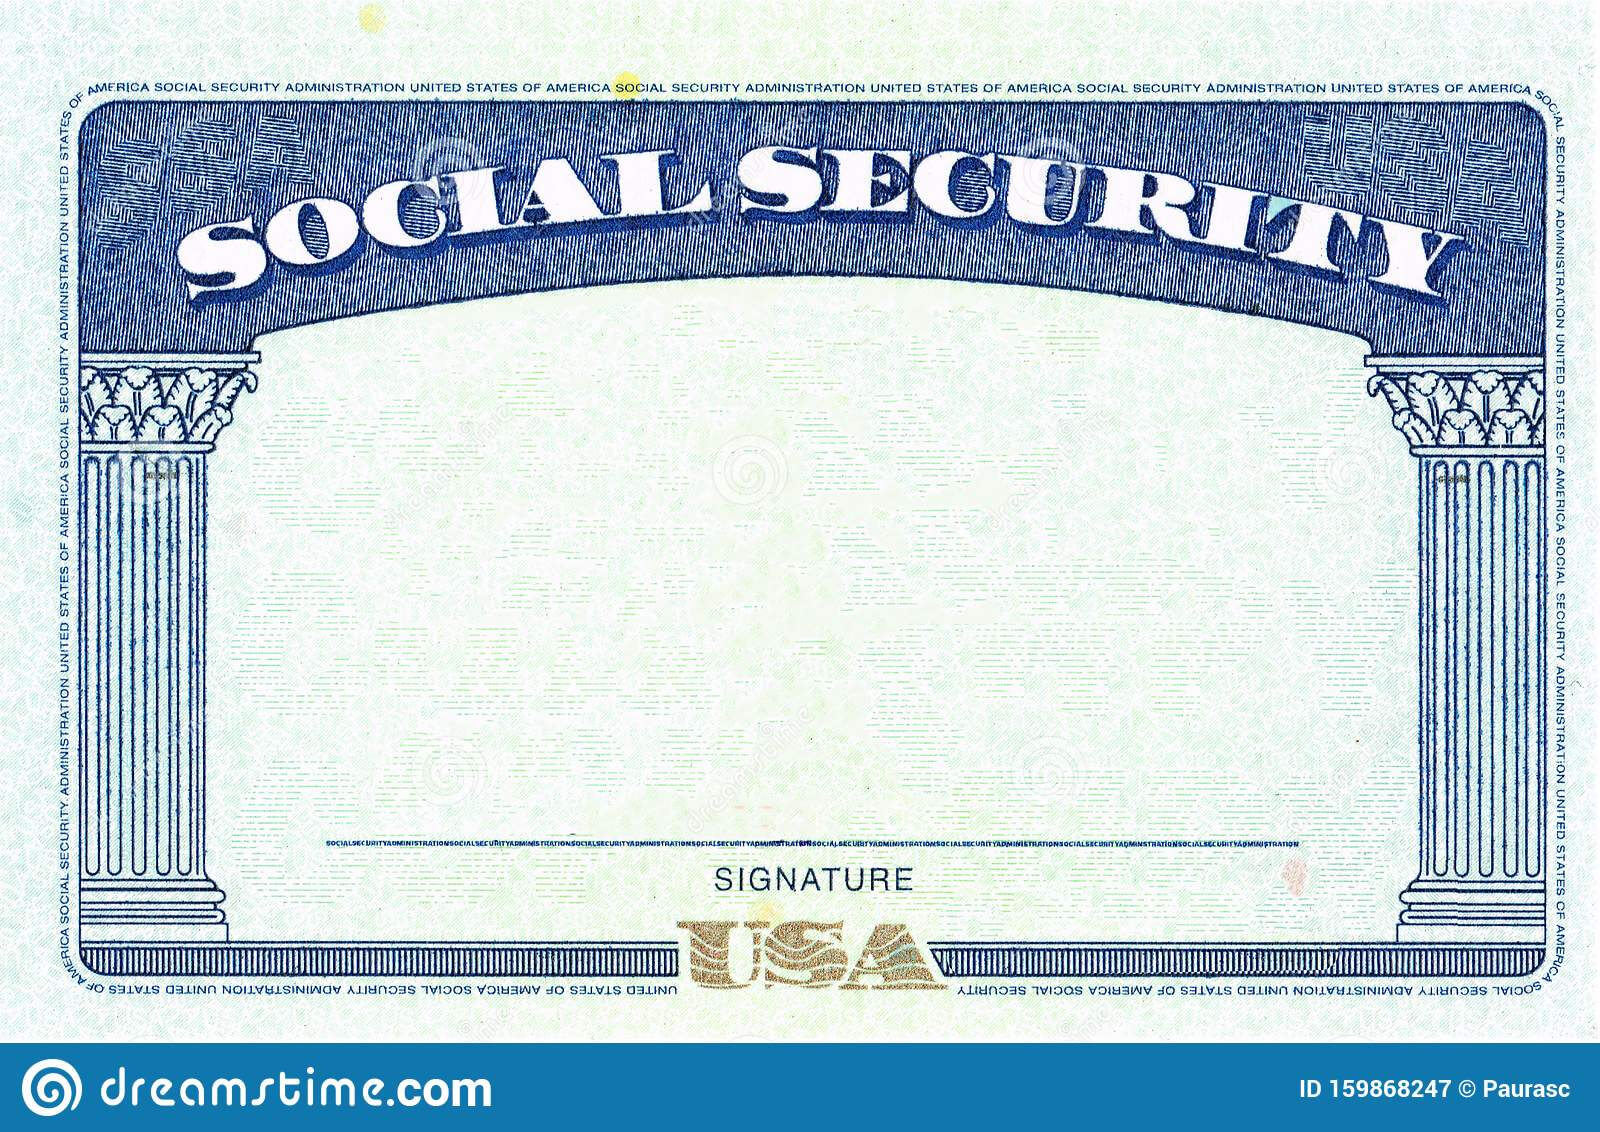 Social Security Card Blank Stock Image. Image Of Emigration In Blank Social Security Card Template